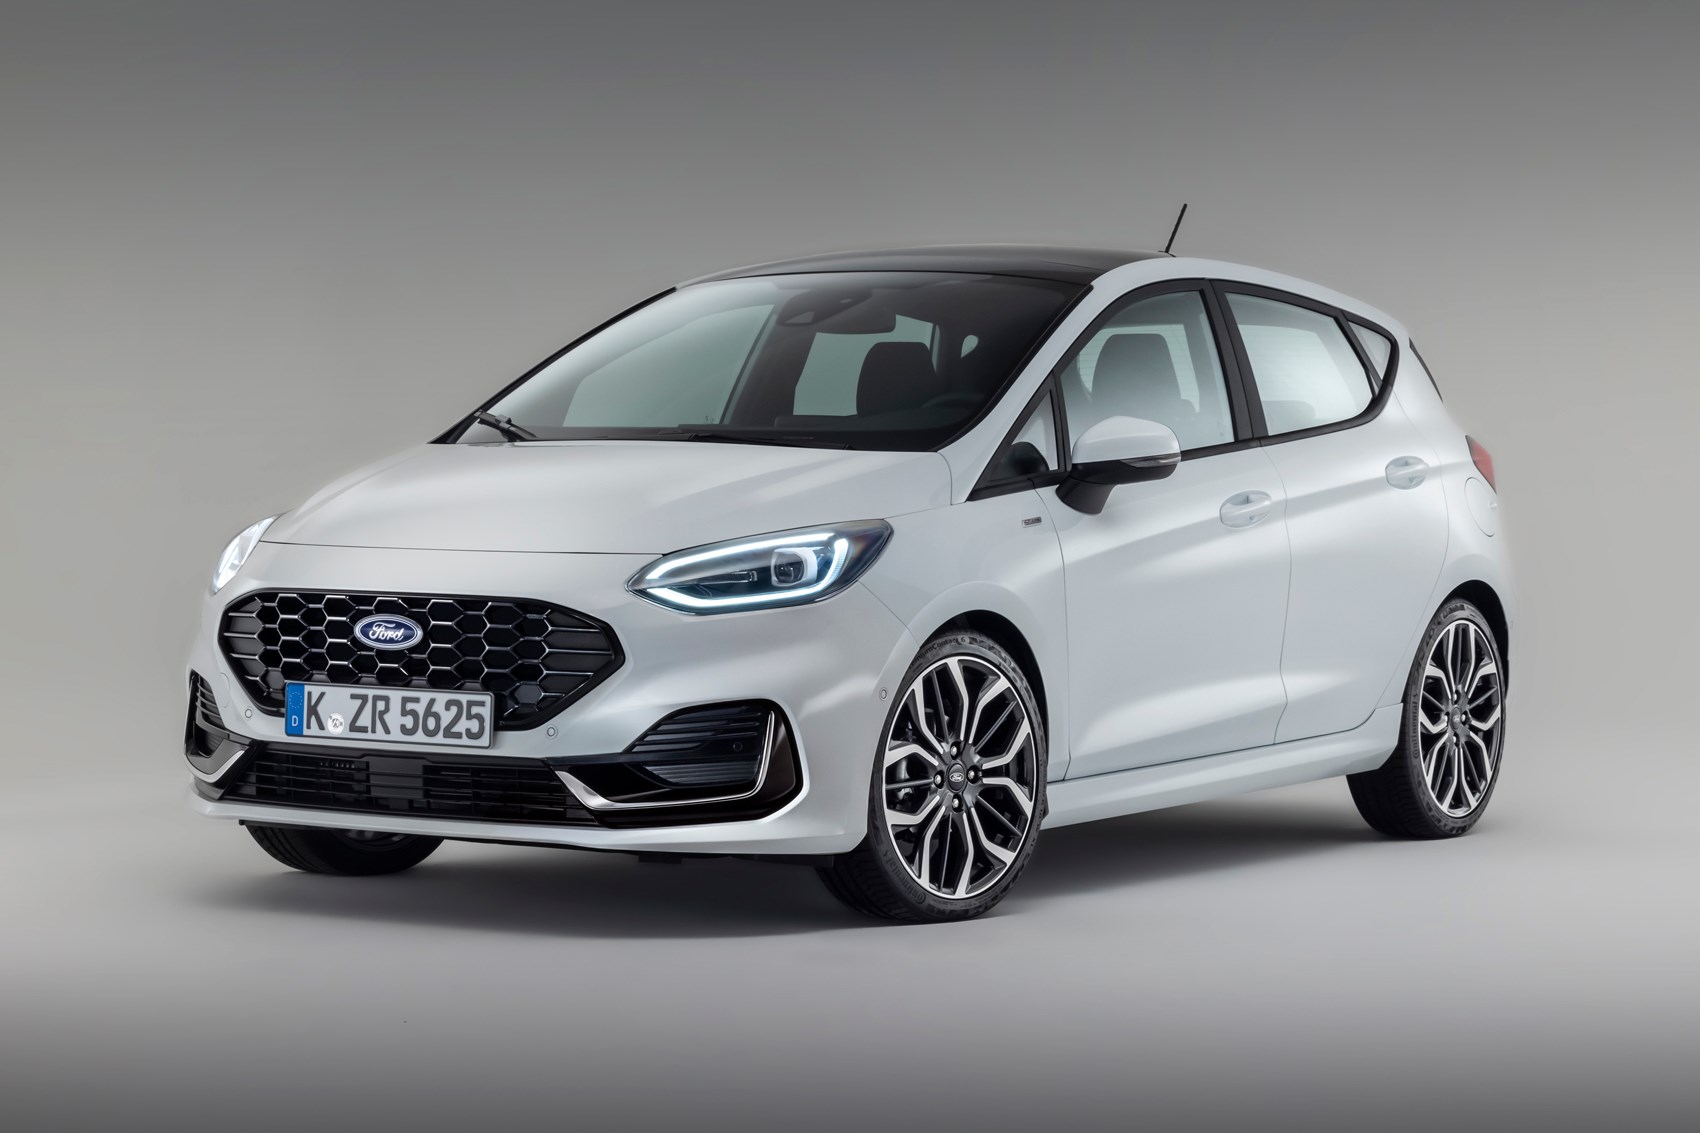 New Ford Fiesta 2021 Facelift Adds More Tech And Electrification Car